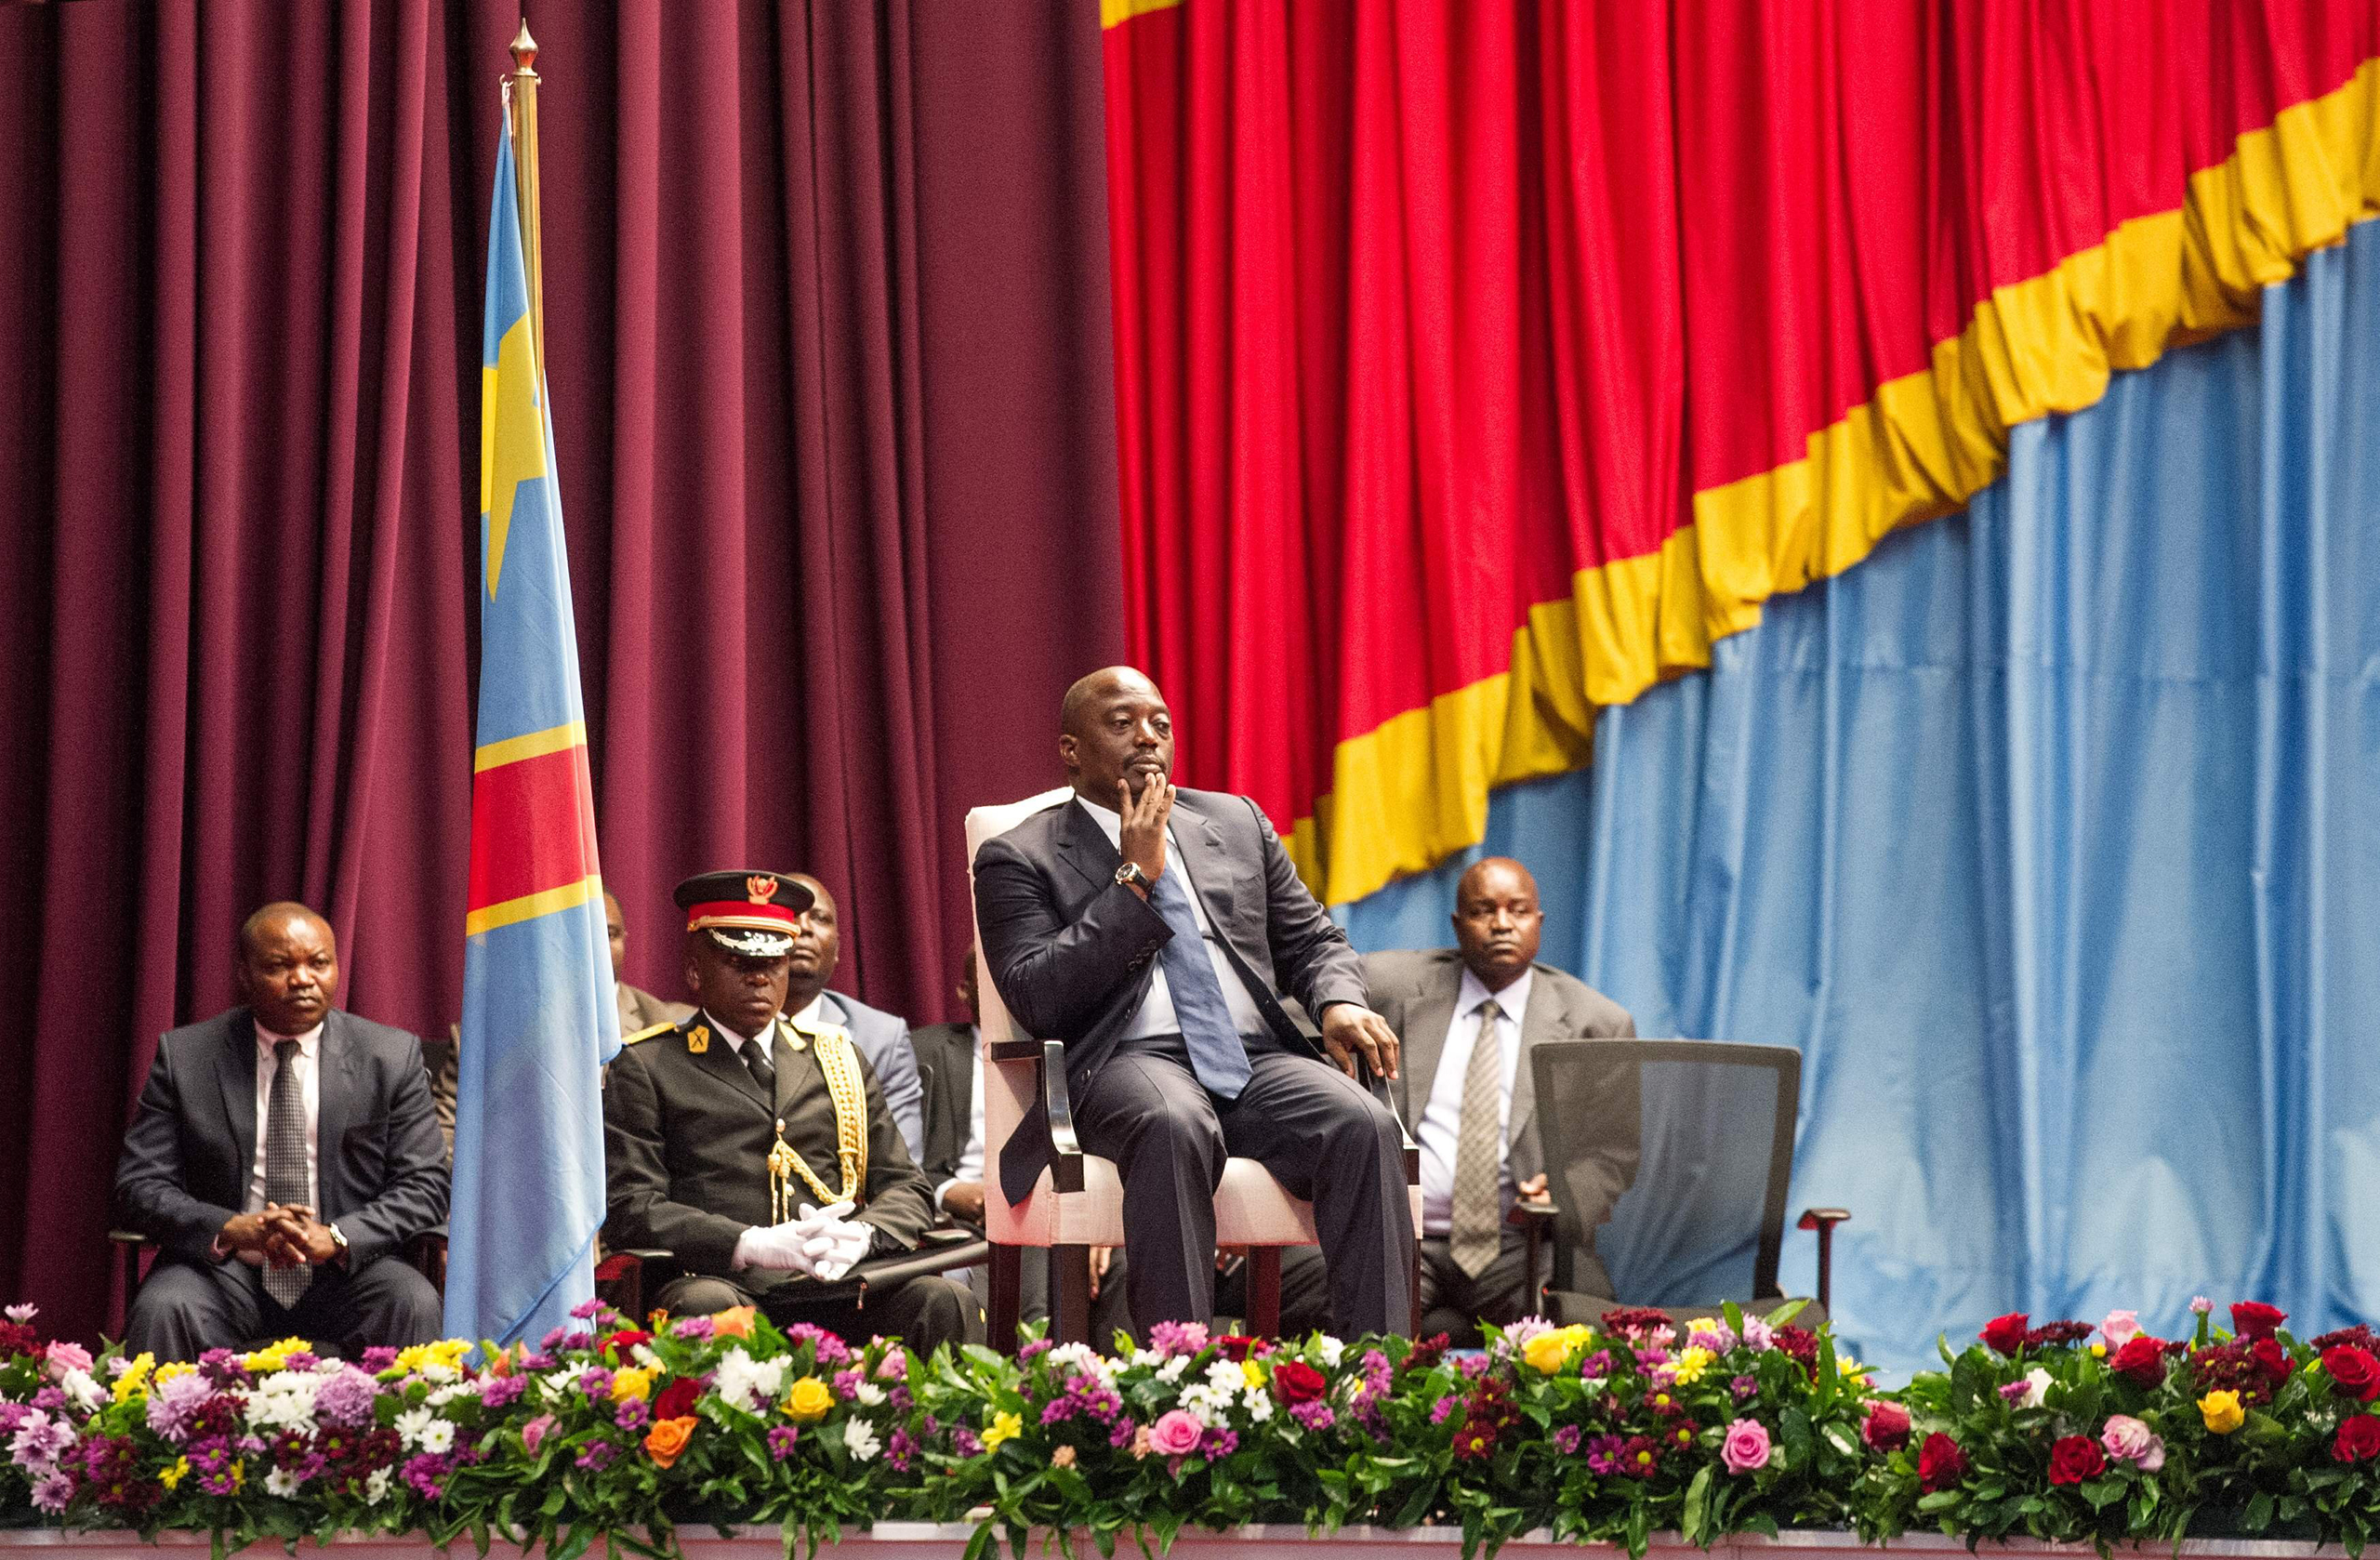 Congolese President Joseph Kabila sits during a special joint session of parliament in Kinshasa on Nov. 15, 2016, the day after Prime Minister Augustin Matata resigned to make way for an opposition figure in line with a controversial deal that effectively extended the president's term in office. (Junior Kannah—AFP/Getty Images)